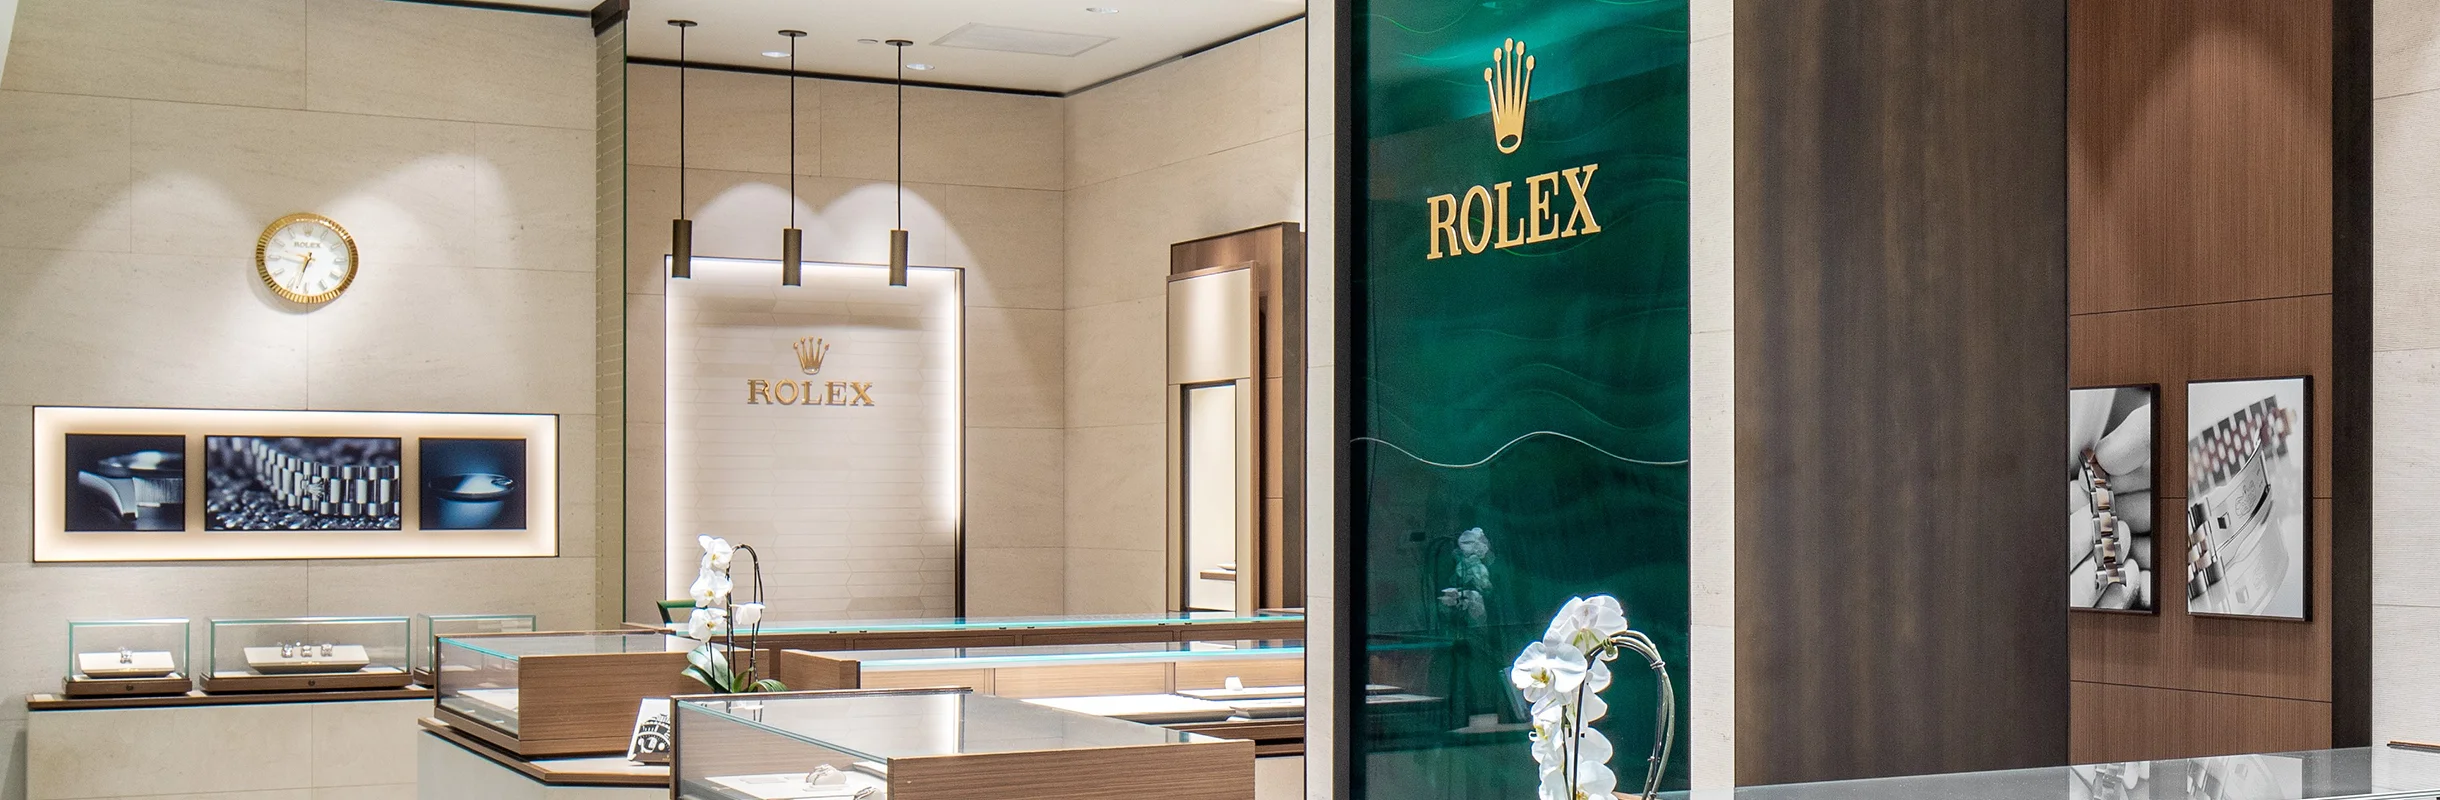 Our Rolex history